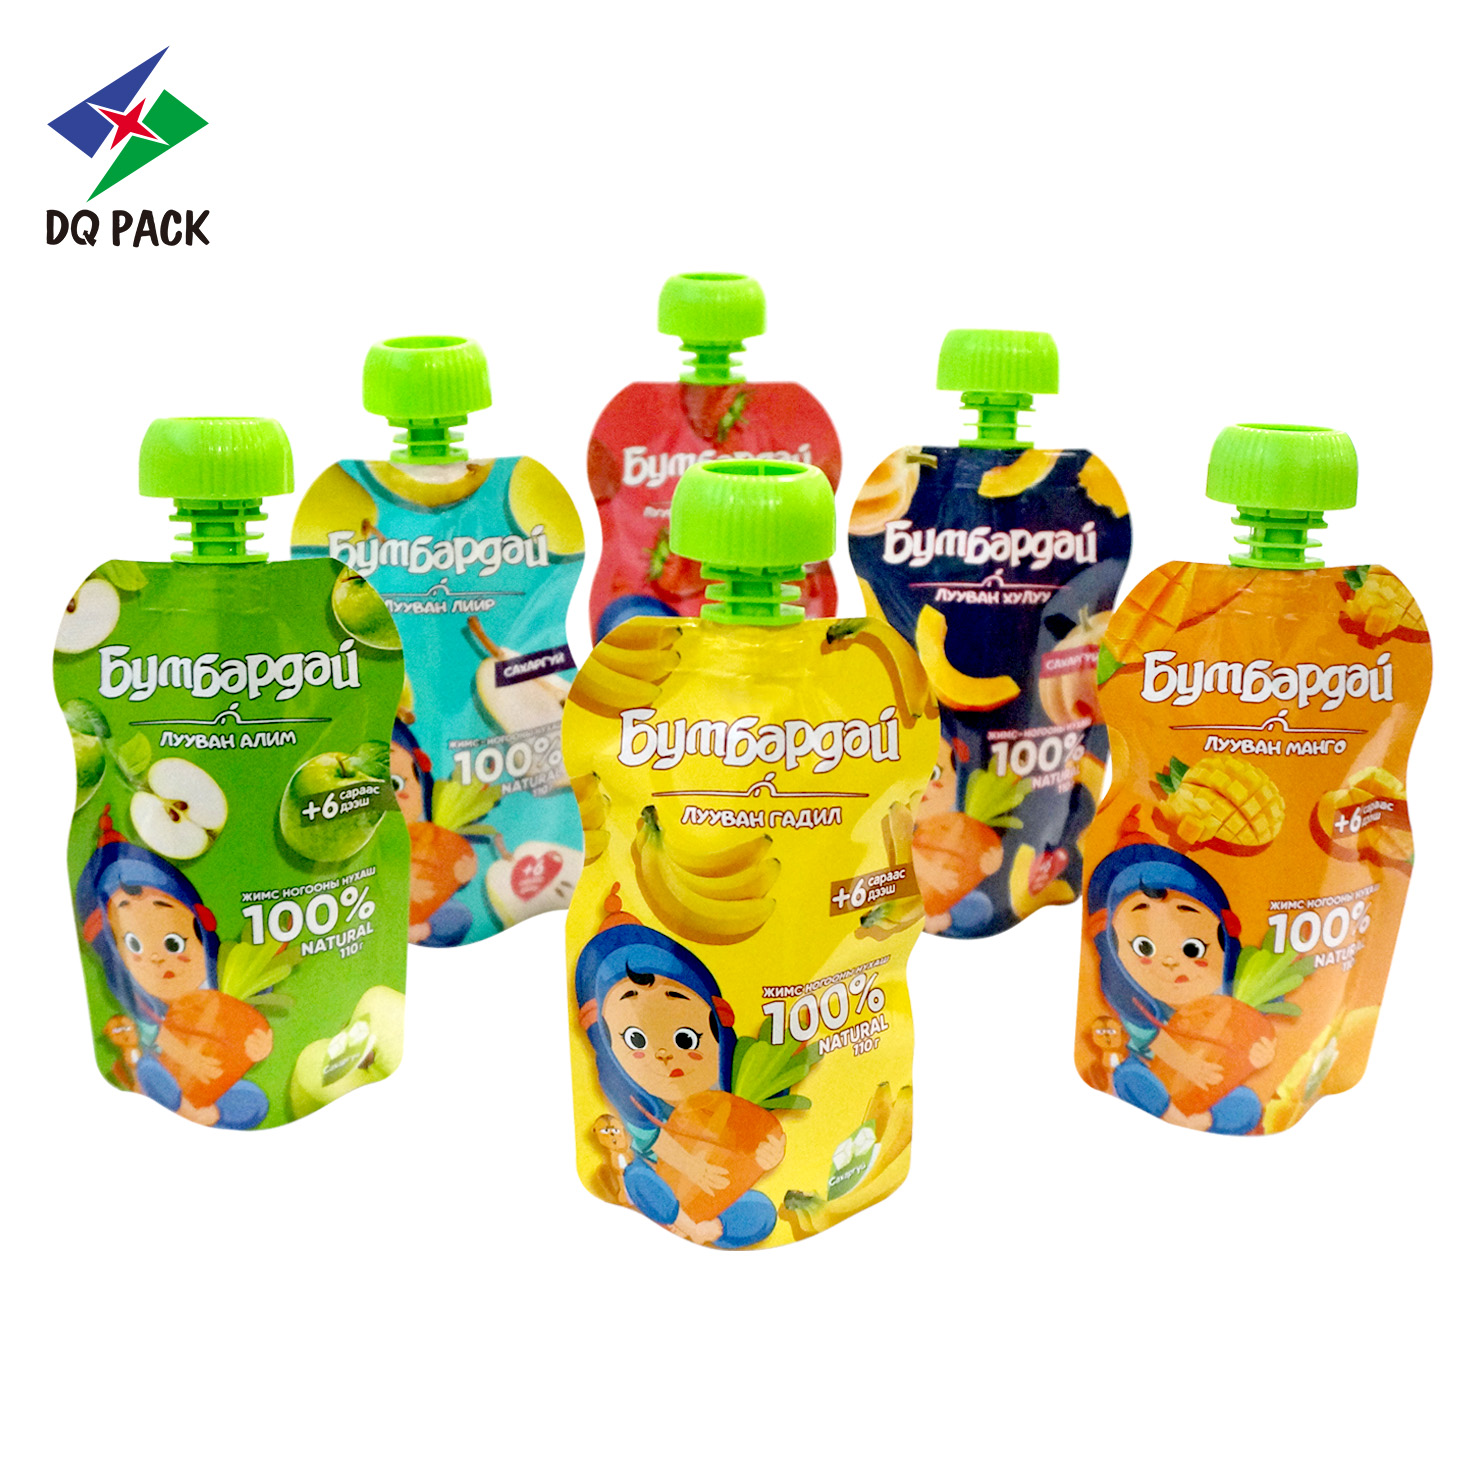 DQ PACK OEM Suppliers Stand Up Spout Pouch Plastic Packaging Bag Drink Package Pouches With Suction Nozzle